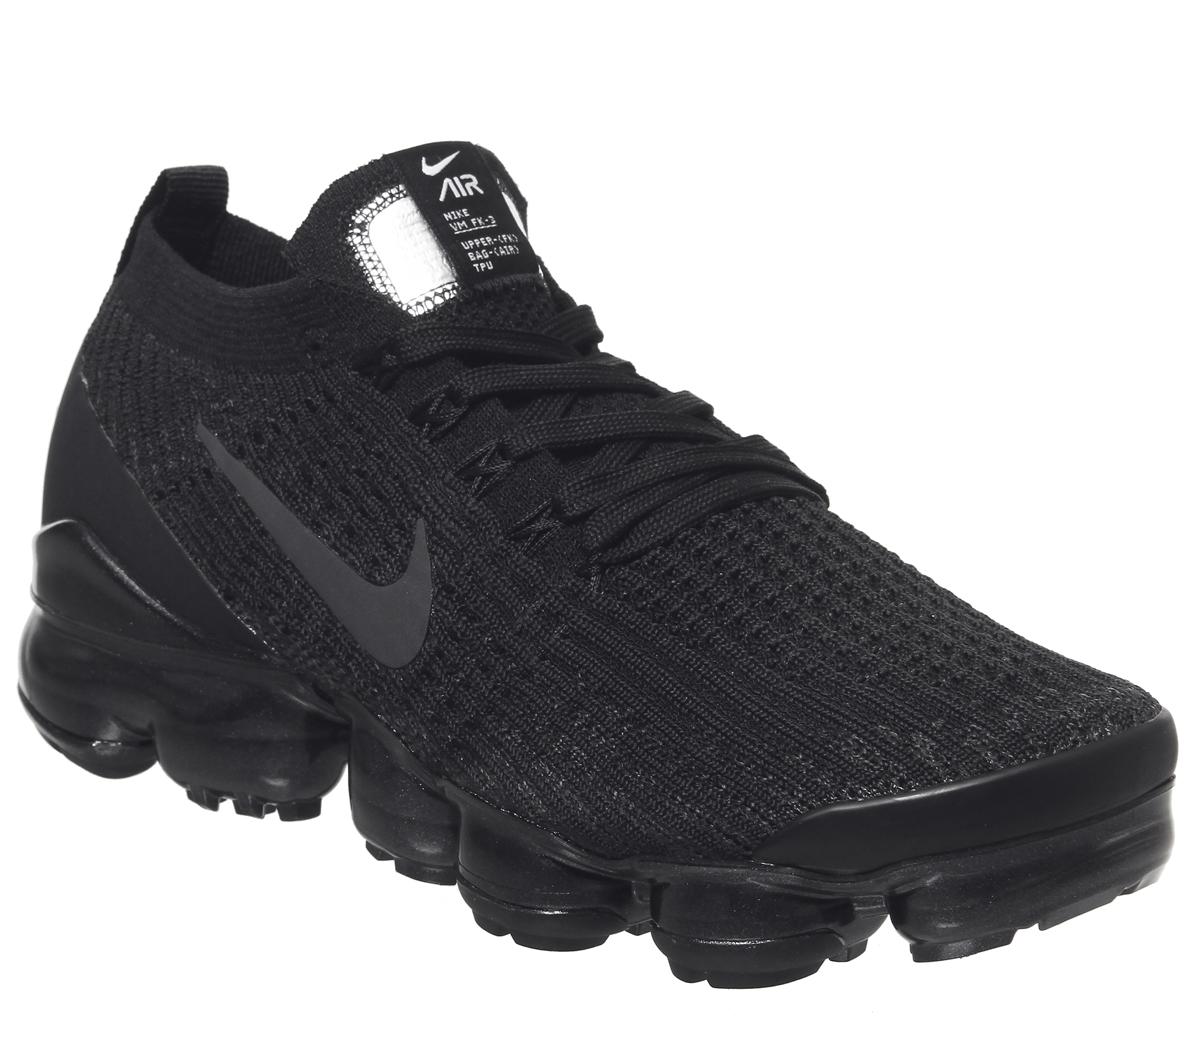 Nike Vapormax Air Vapormax Fk 3 Trainers Black Anthracite White Metallic  Silver - Hers trainers